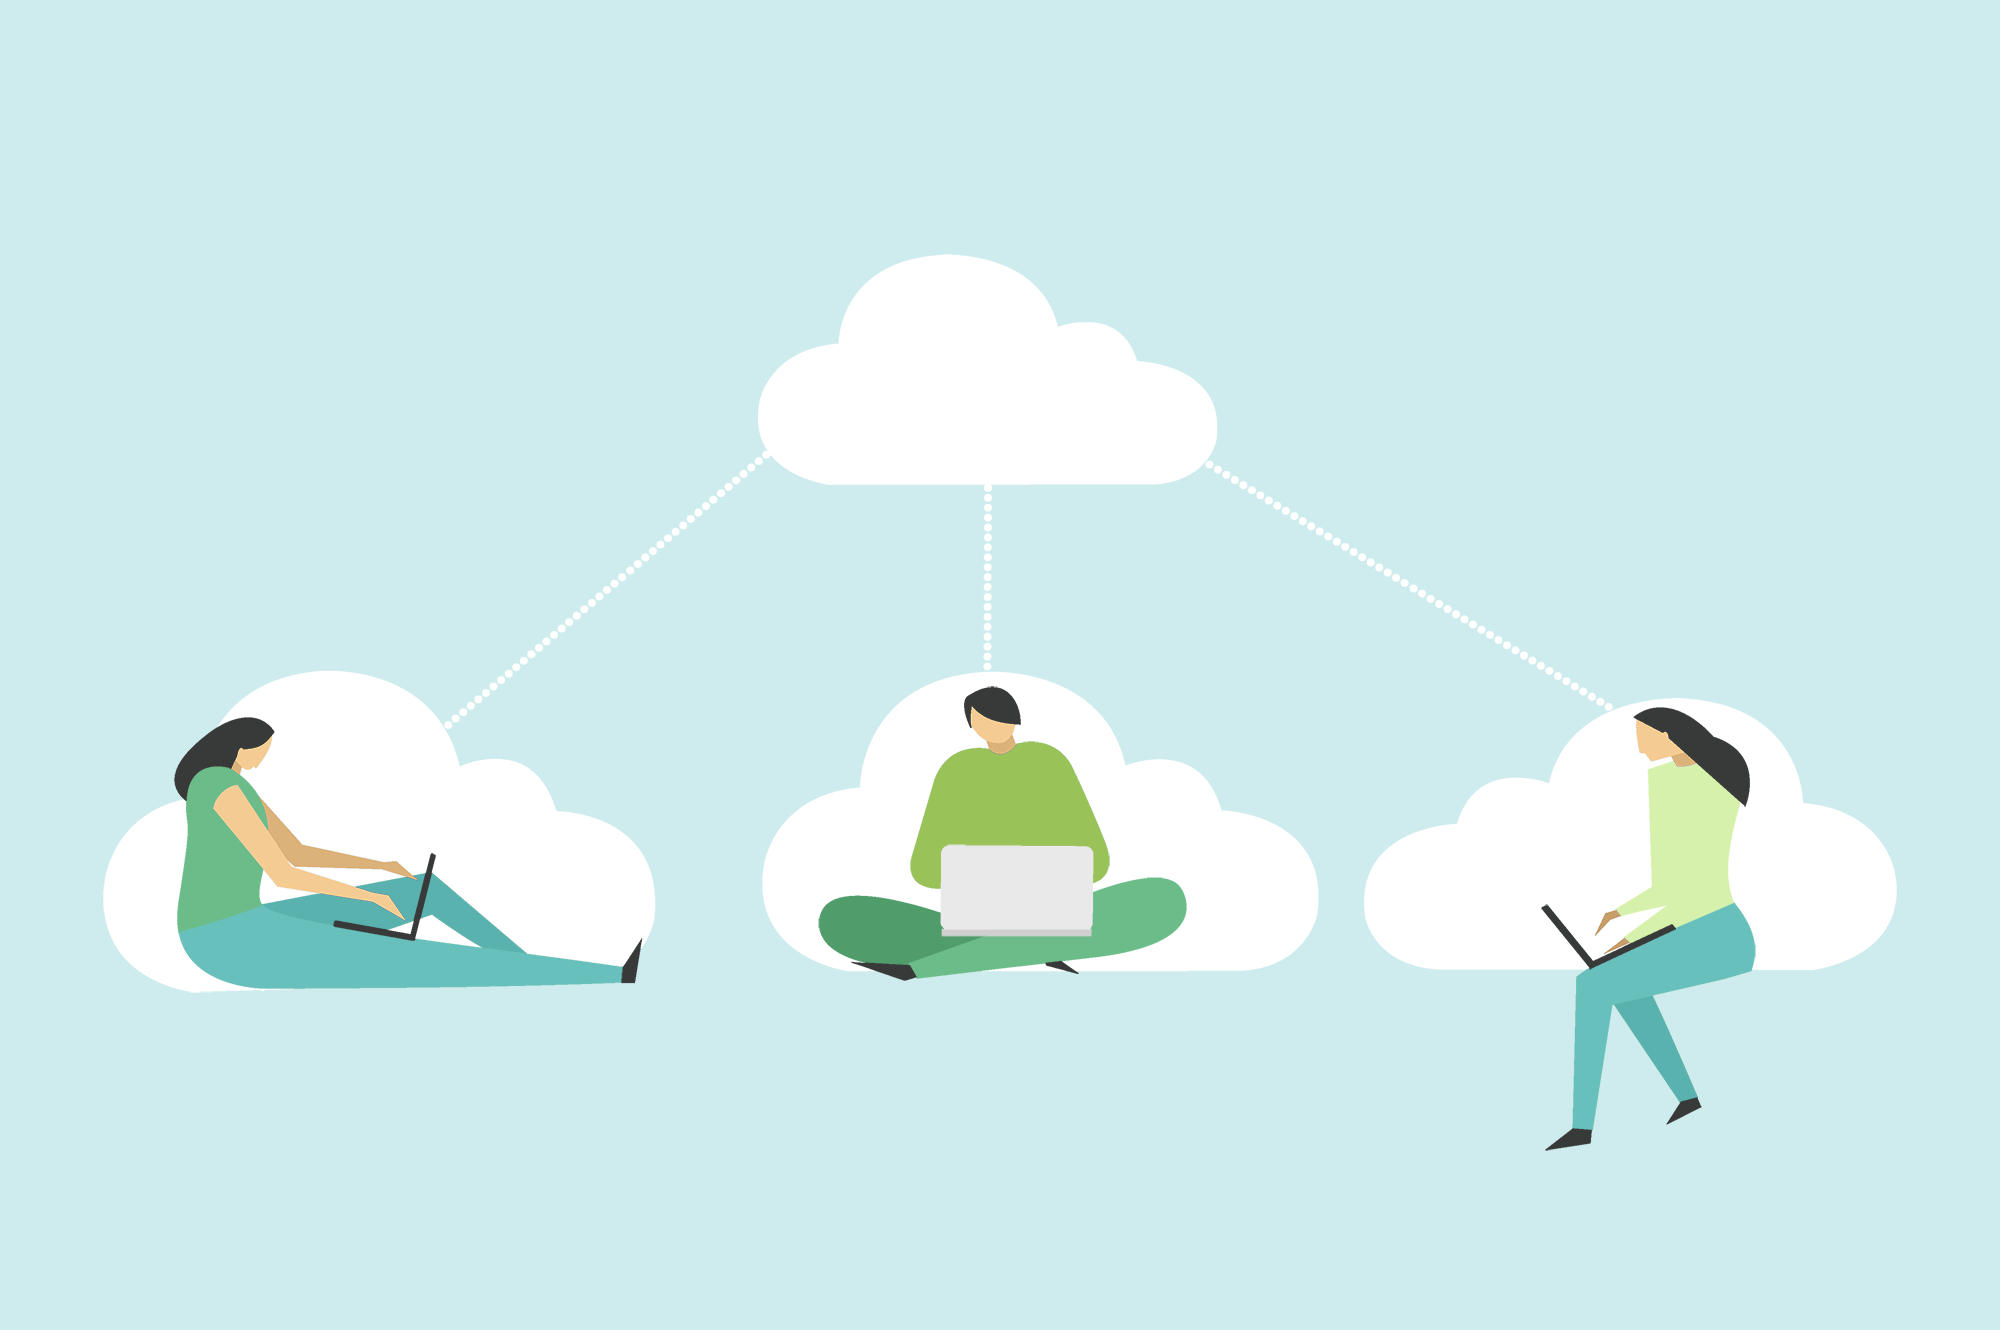 How Cloud Storage Can Help Your Team Succeed